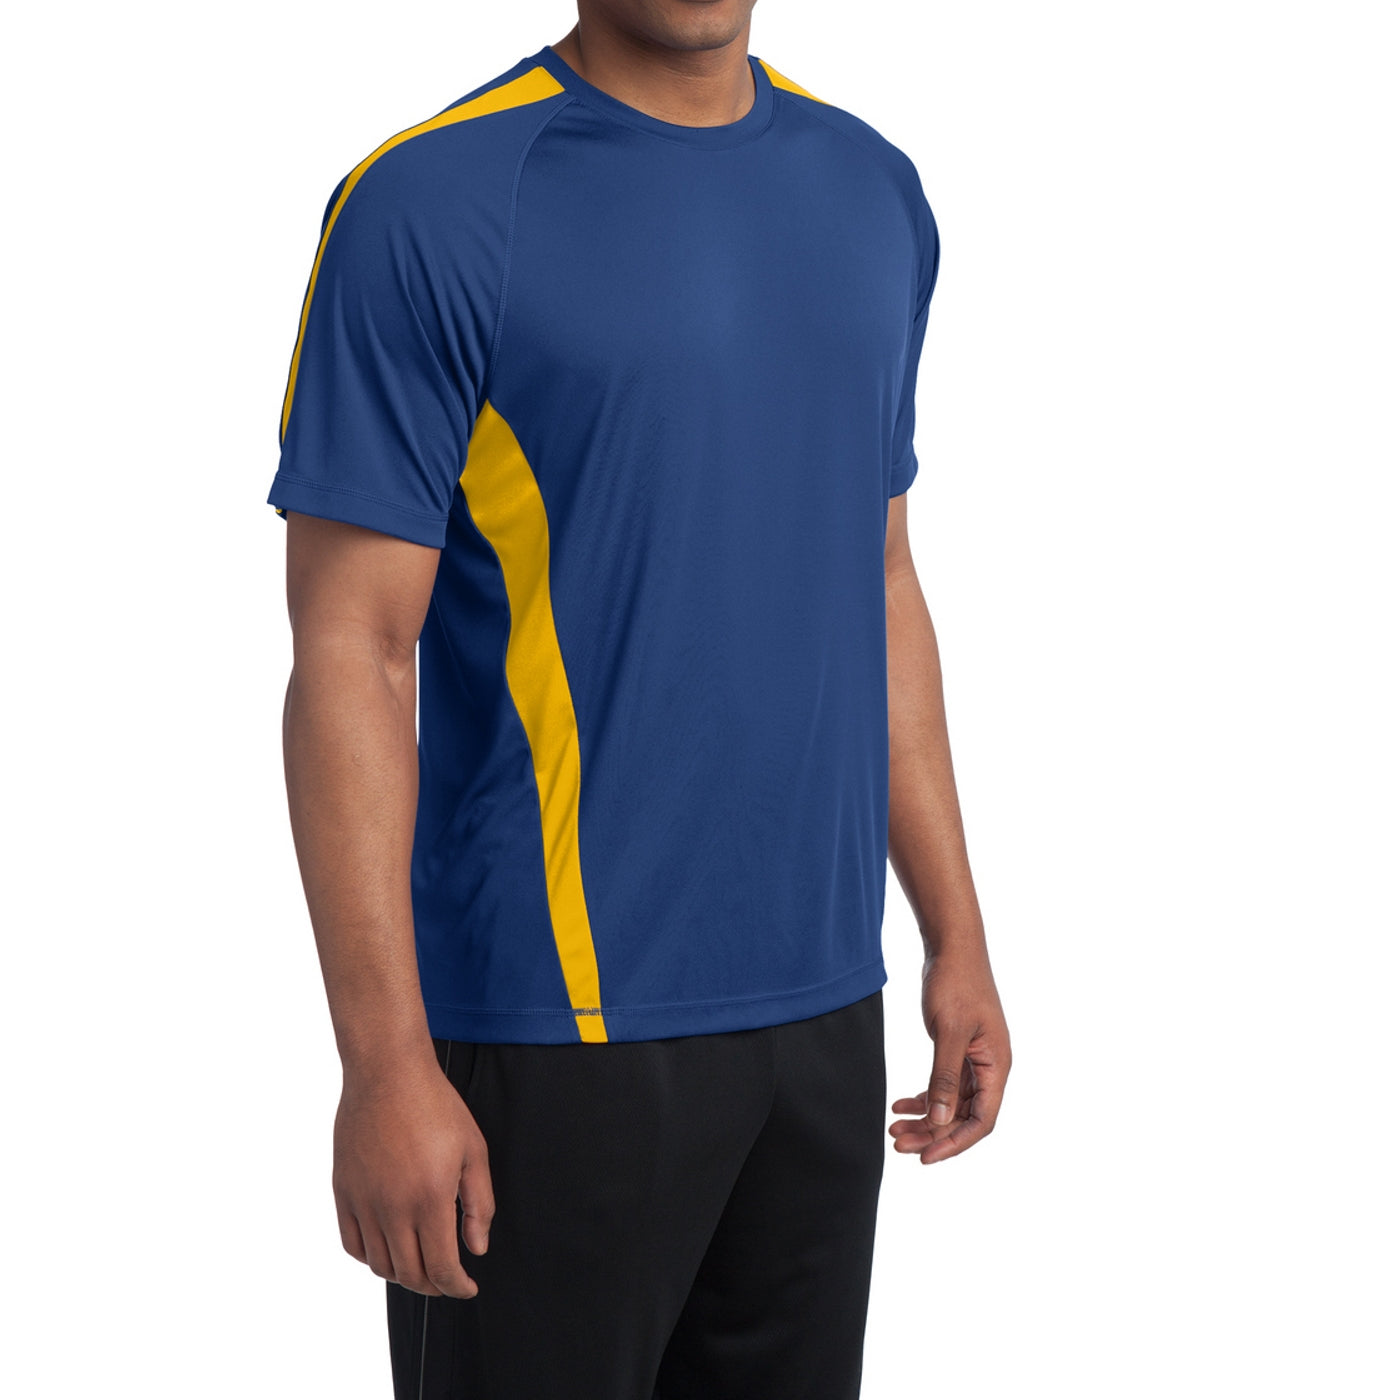 Men's Colorblock PosiCharge Competitor Tee - True Royal/ Gold